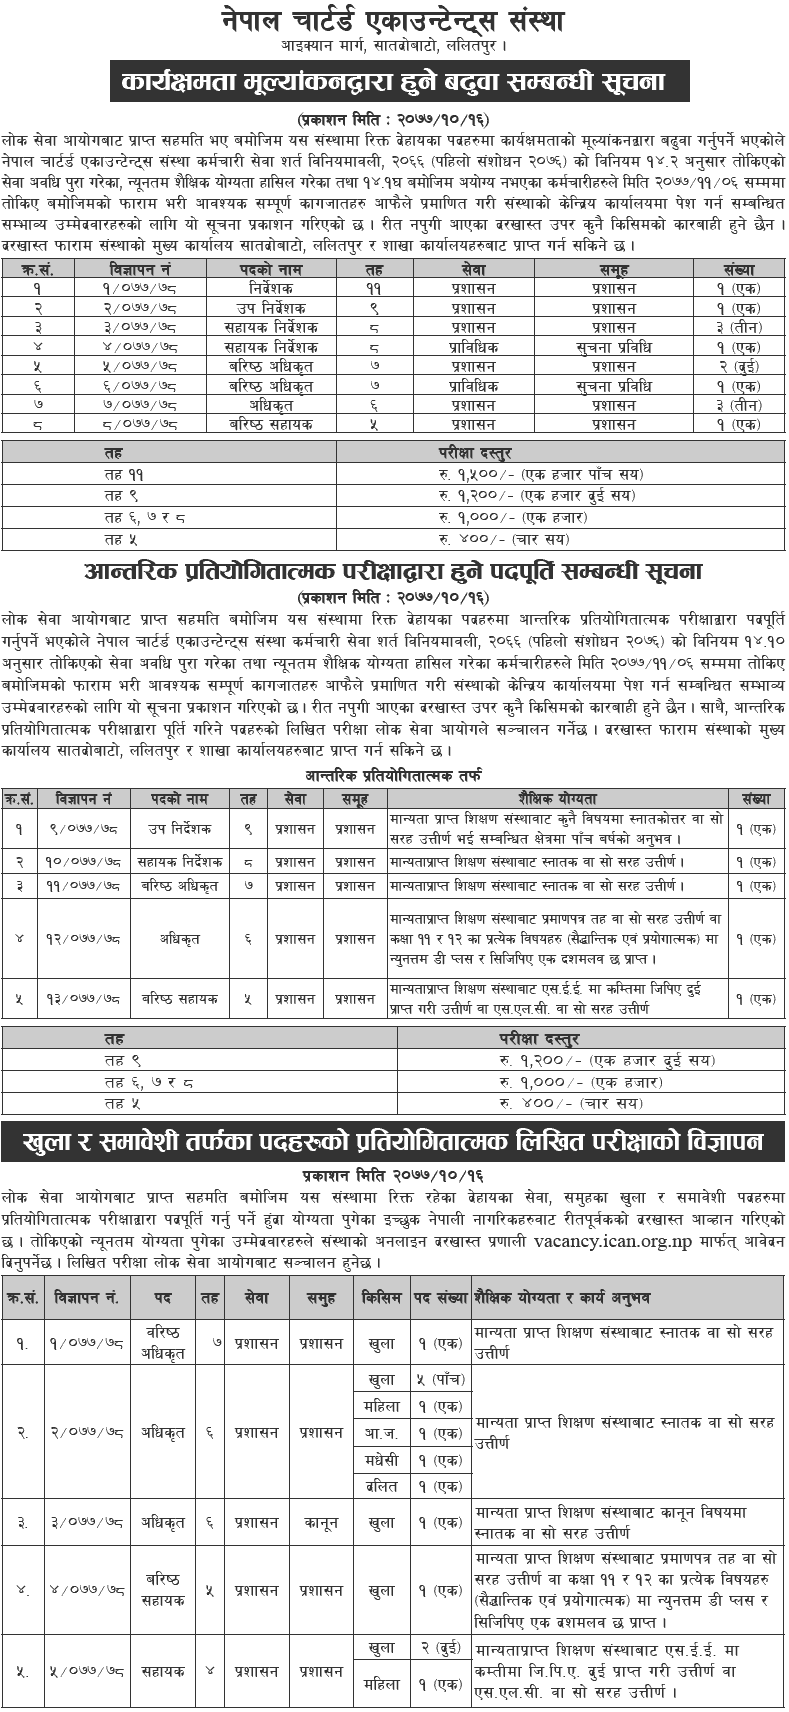 The Institute of Chartered Accountants of Nepal (ICAN) Vacancy 2077